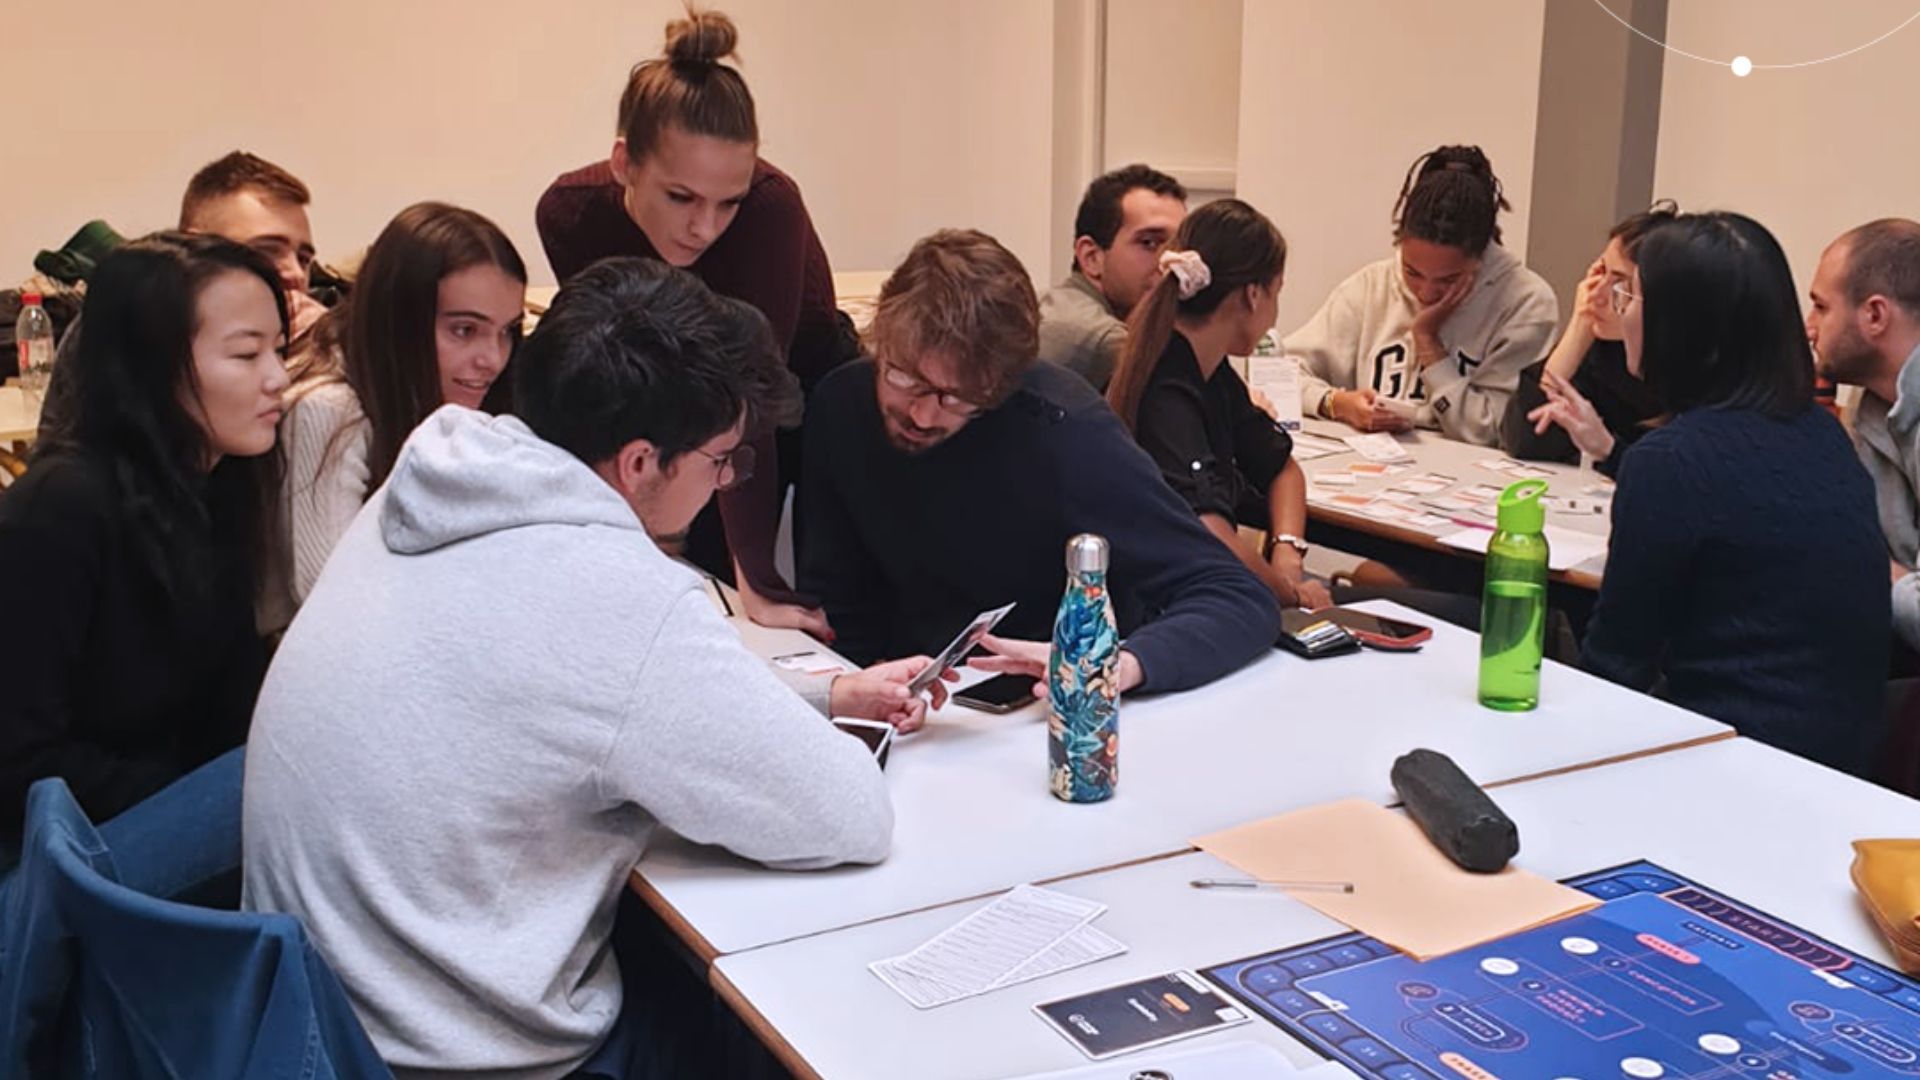 Students from a french university learning entrepreunership with startup mundi